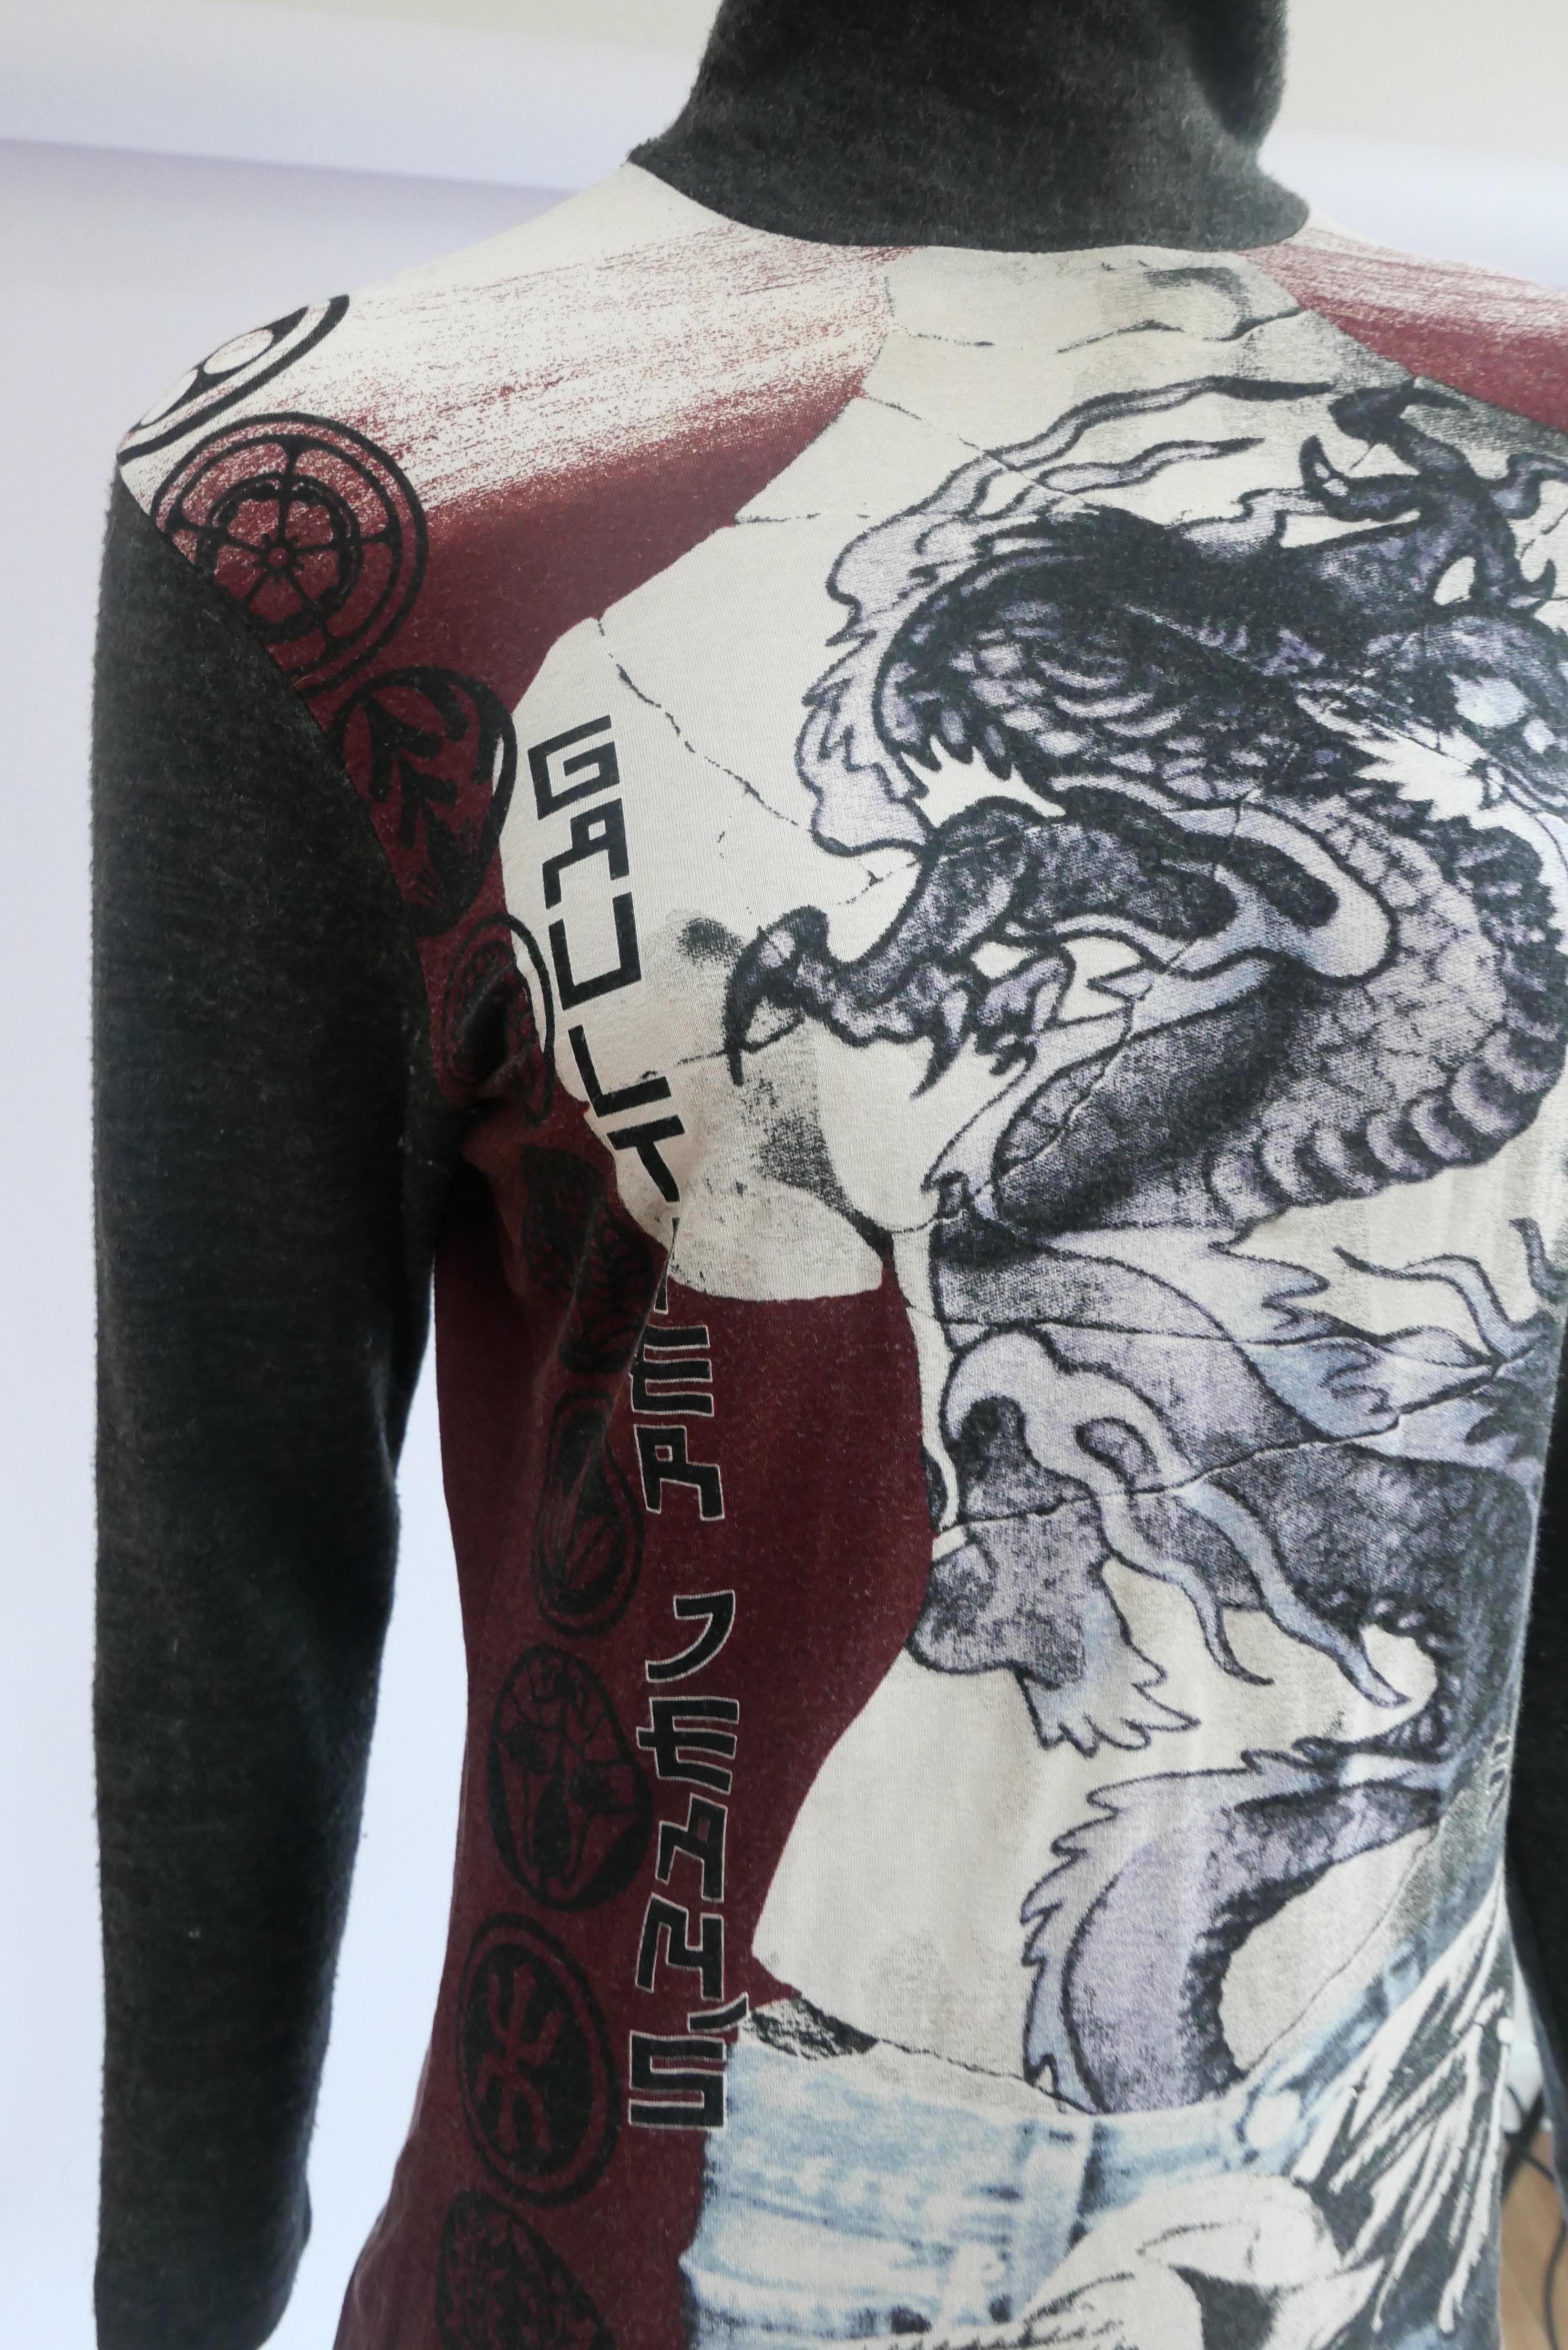 Jean Paul Gaultier Long Sleeve Venus Top
This piece is a turtleneck with the iconic Venus de milo print with a dragon tattoo. The piece is great as an everyday statement piece. Jean Paul Gaultier is a French haute couture and prêt-à-porter fashion